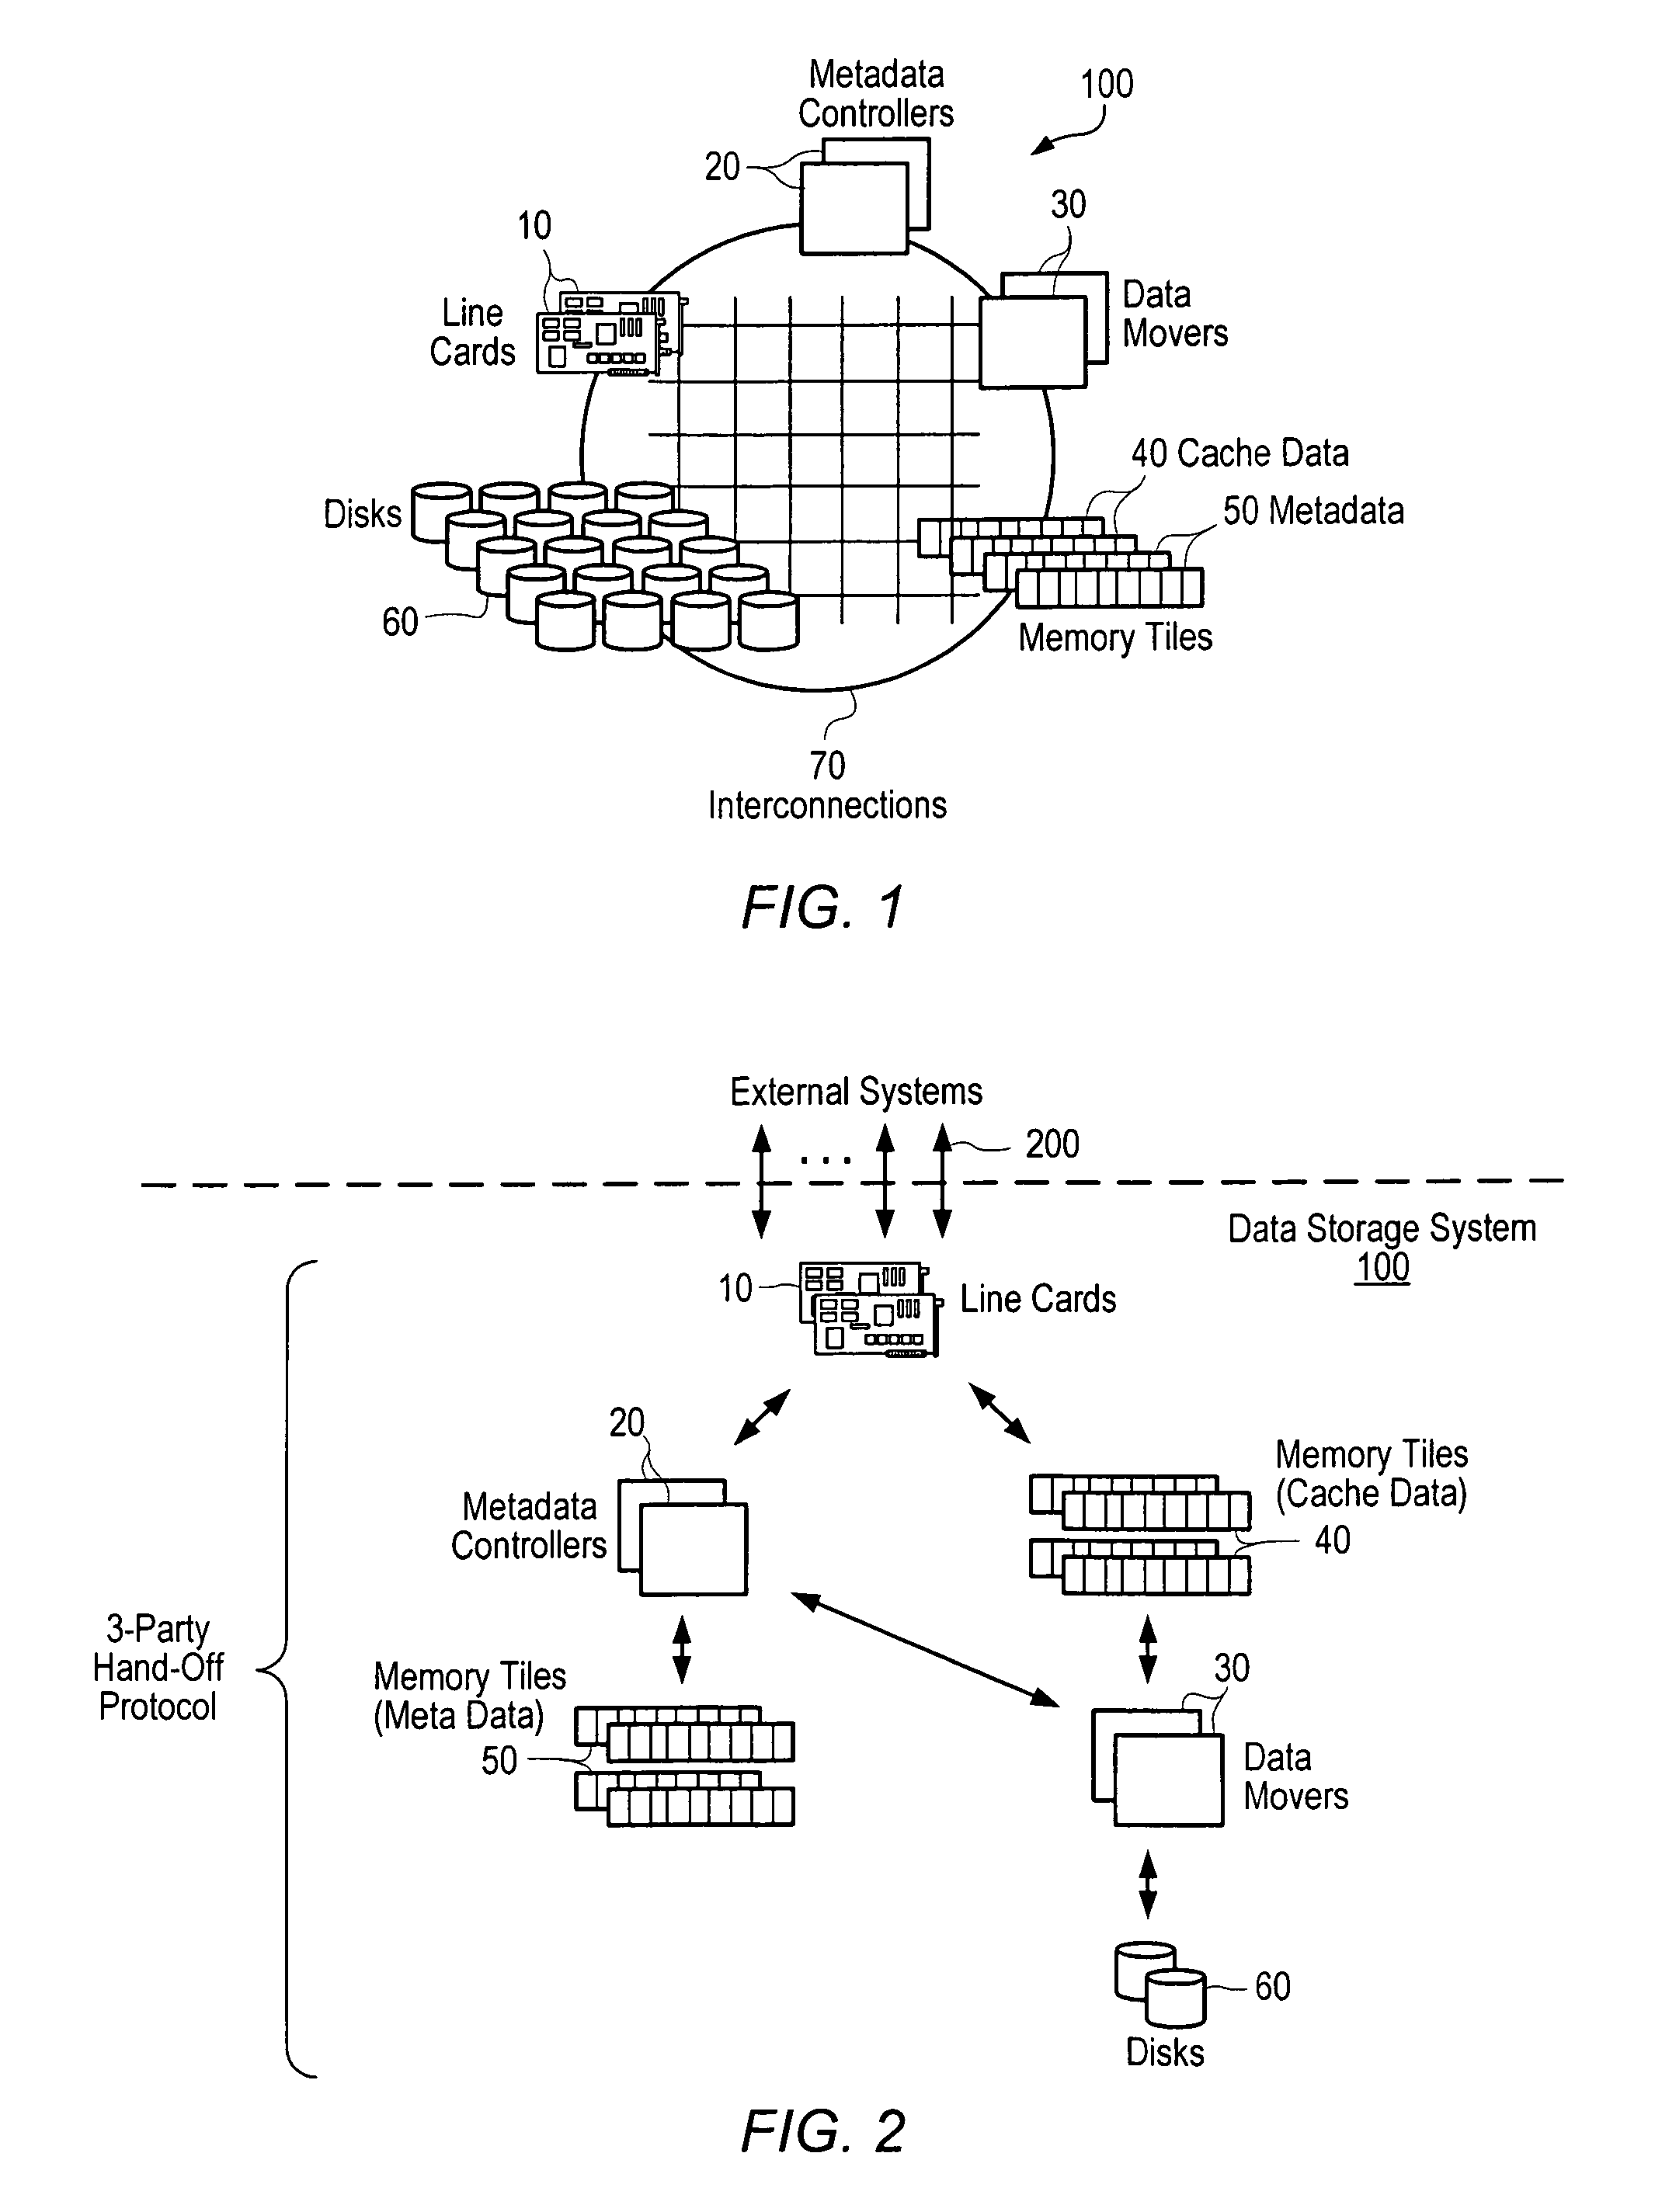 Data storage system using 3-party hand-off protocol to facilitate failure recovery